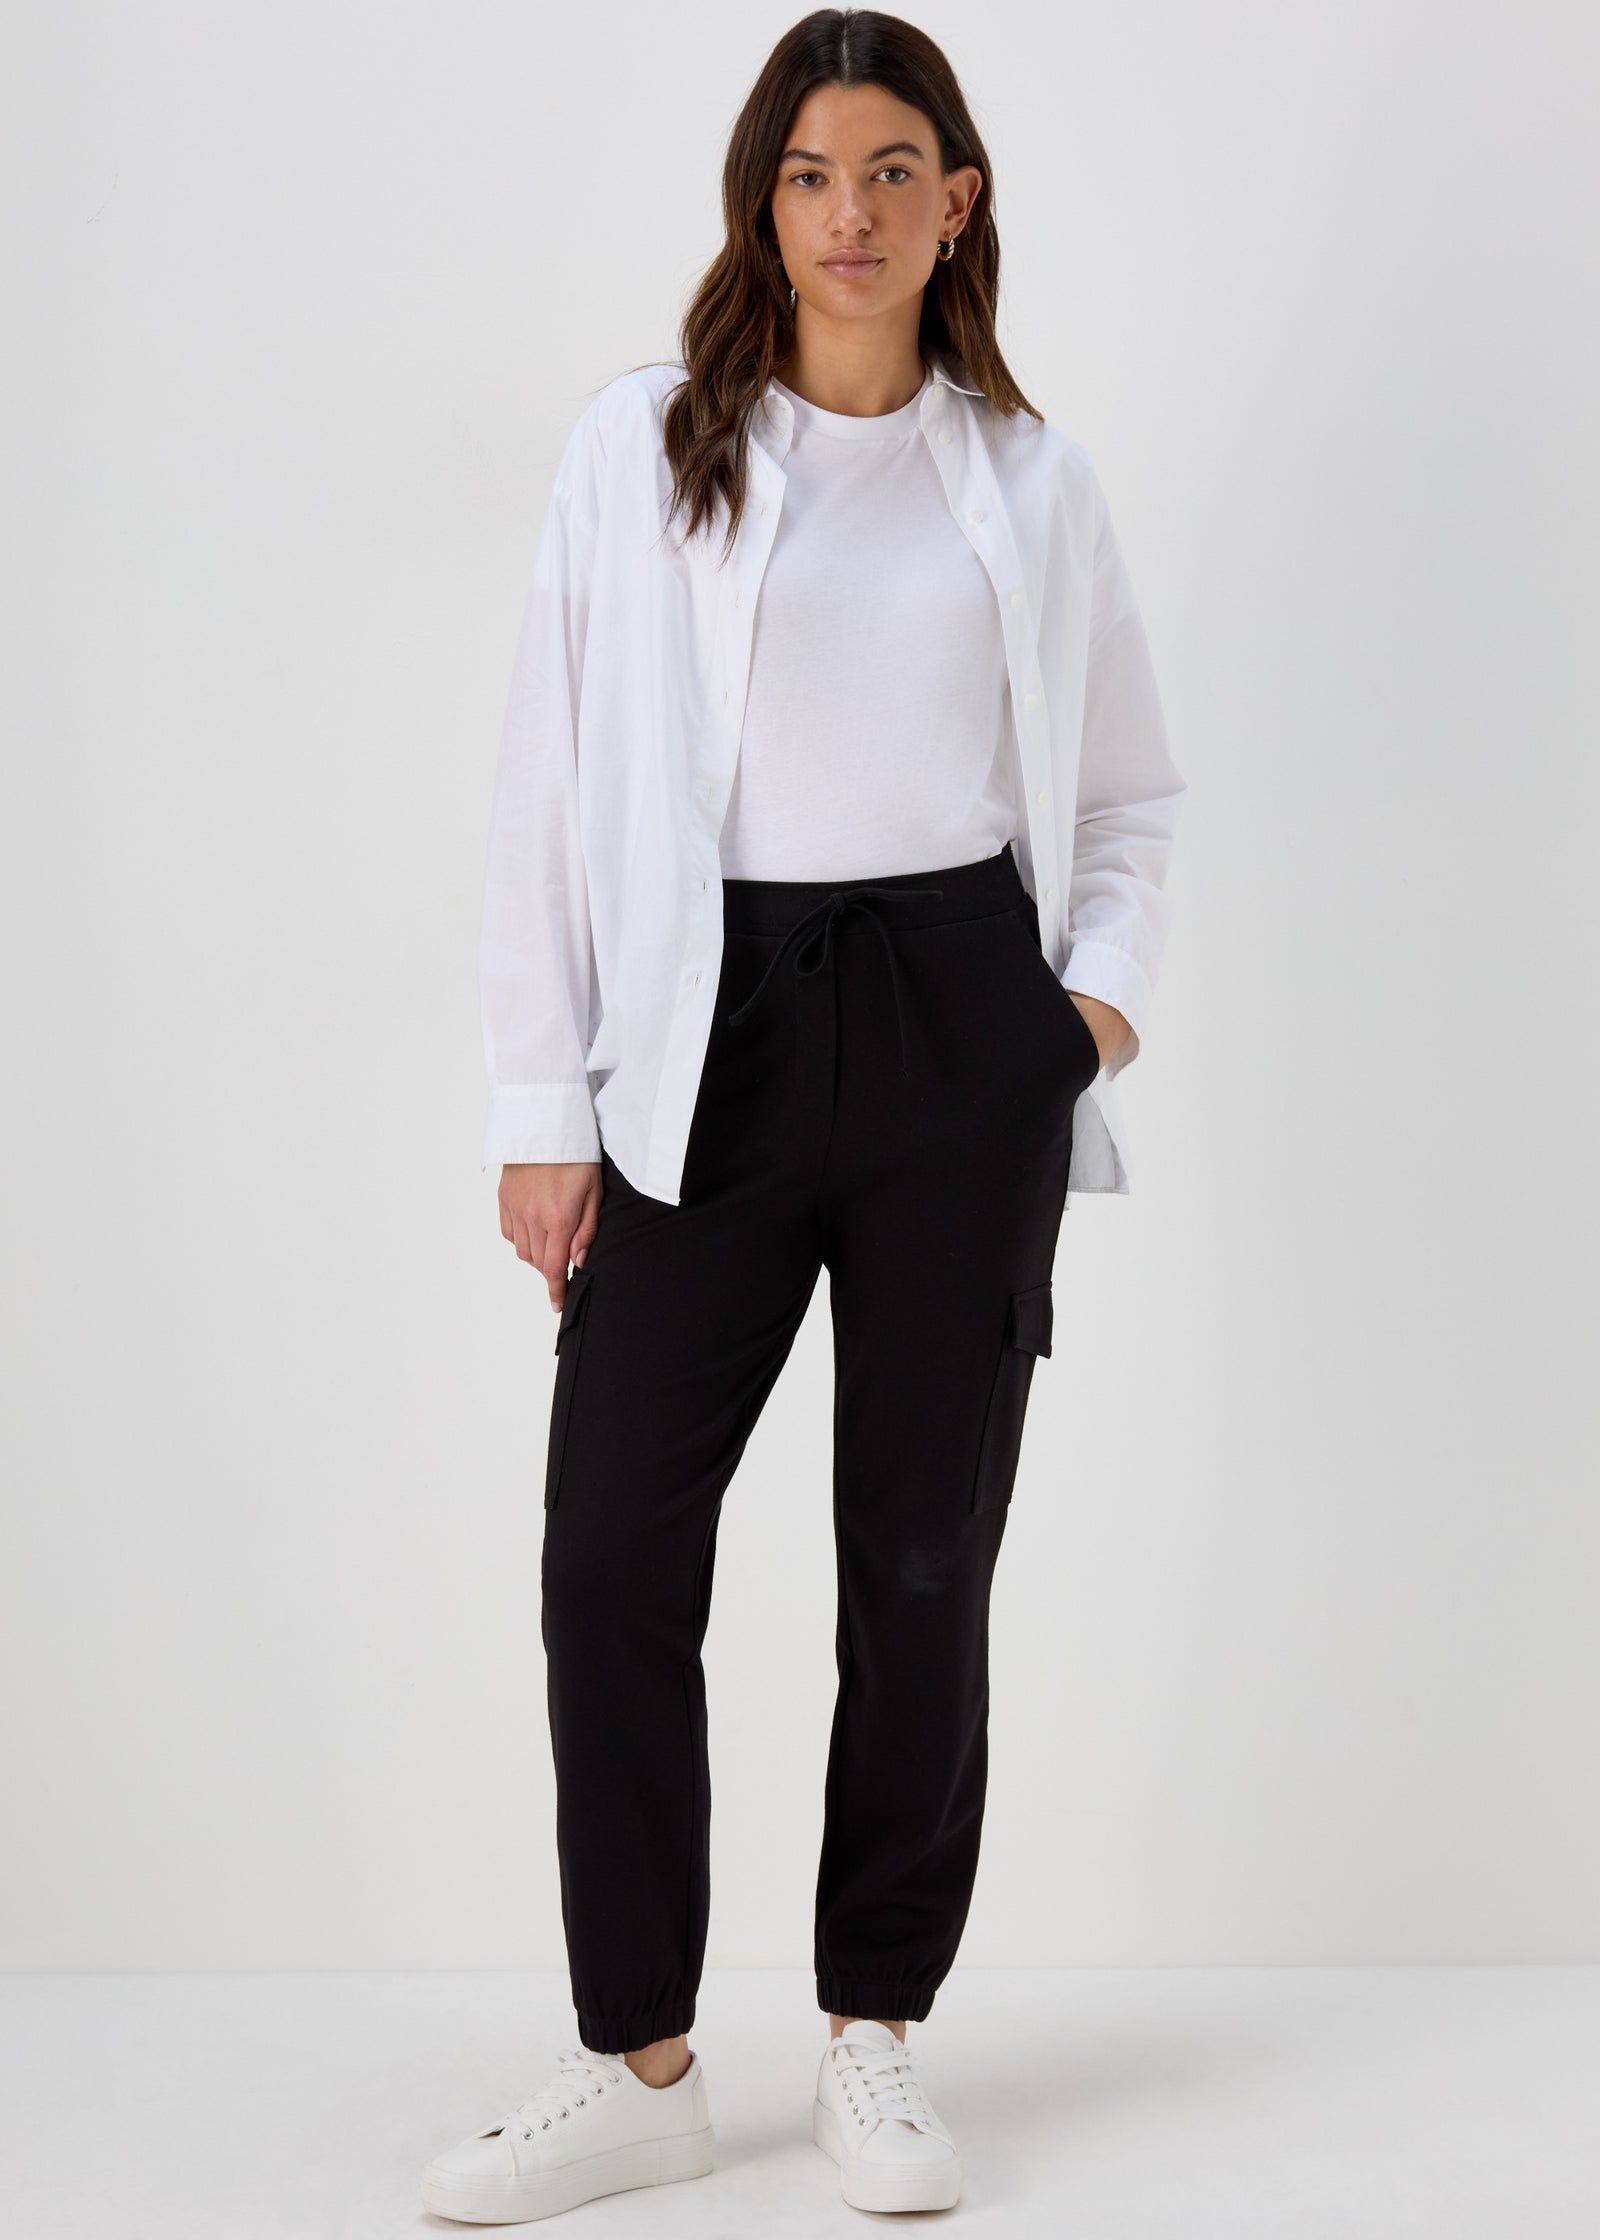 Buy Women's Trousers & Pants at Lowest Price in UAE - bfab